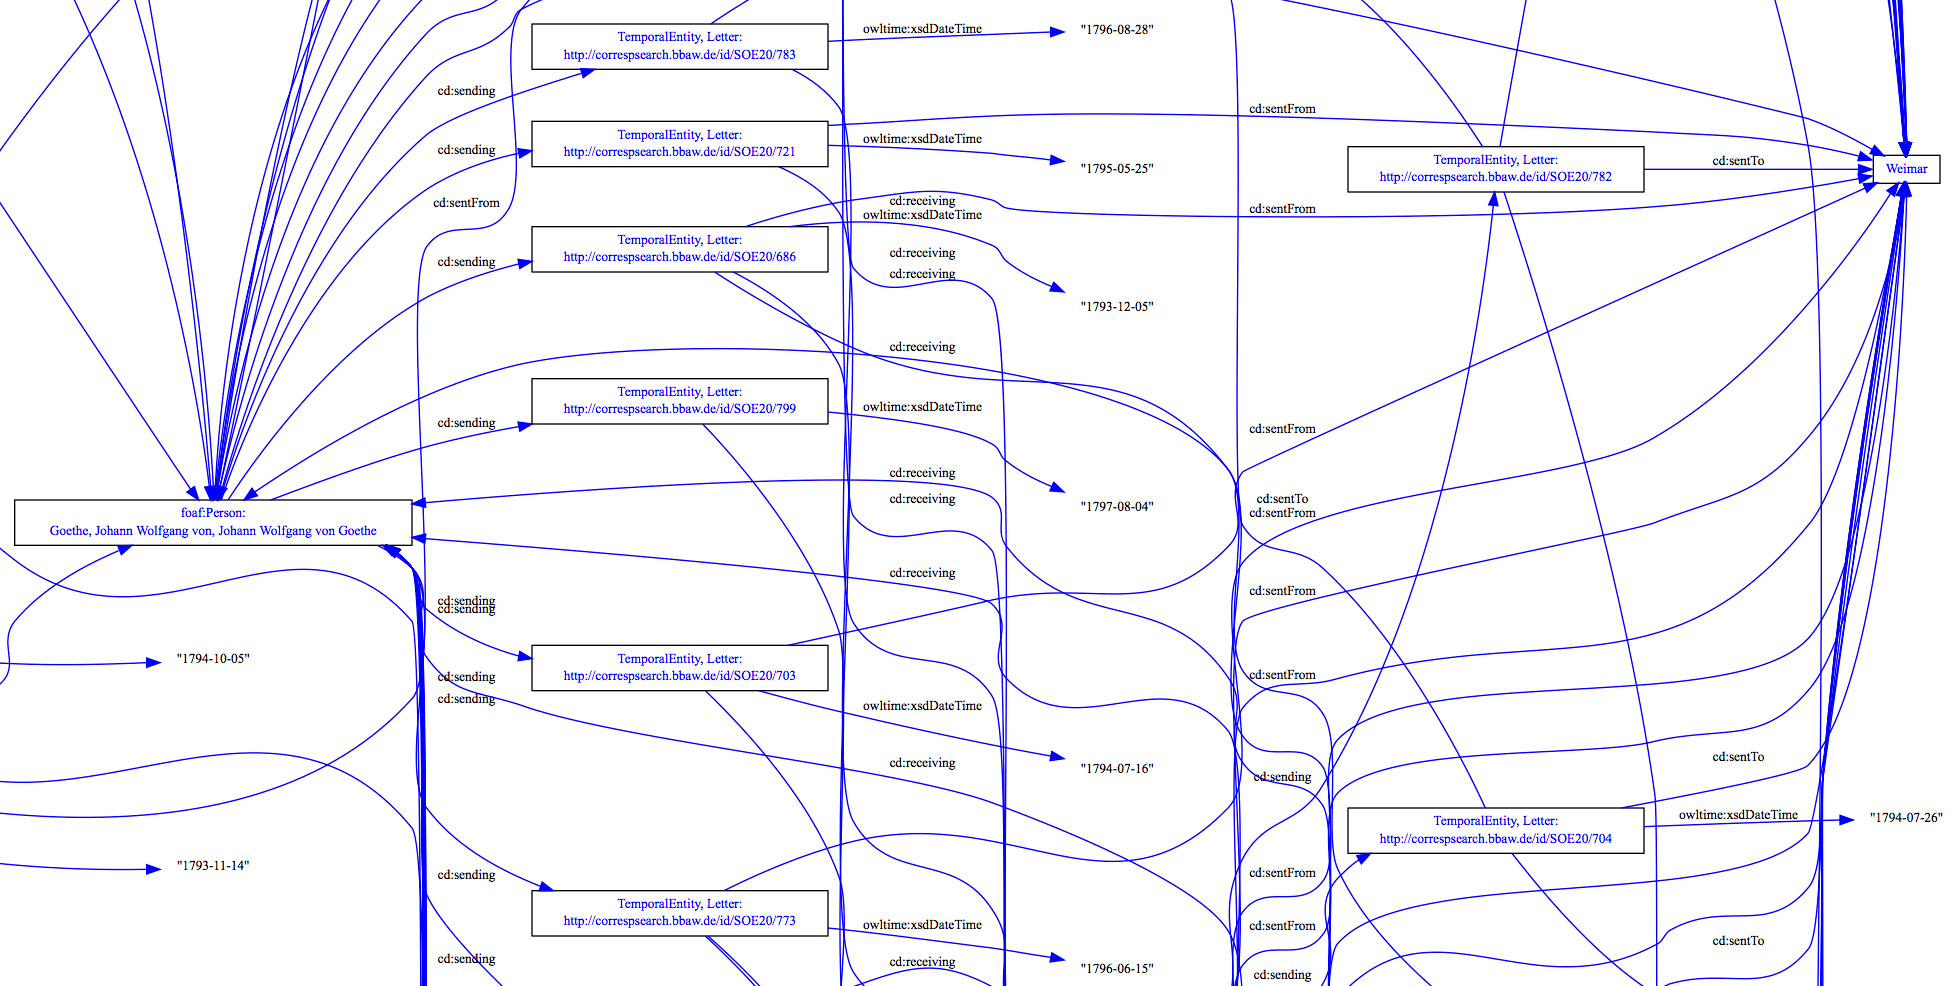 Goethe's letter network in correspSearch